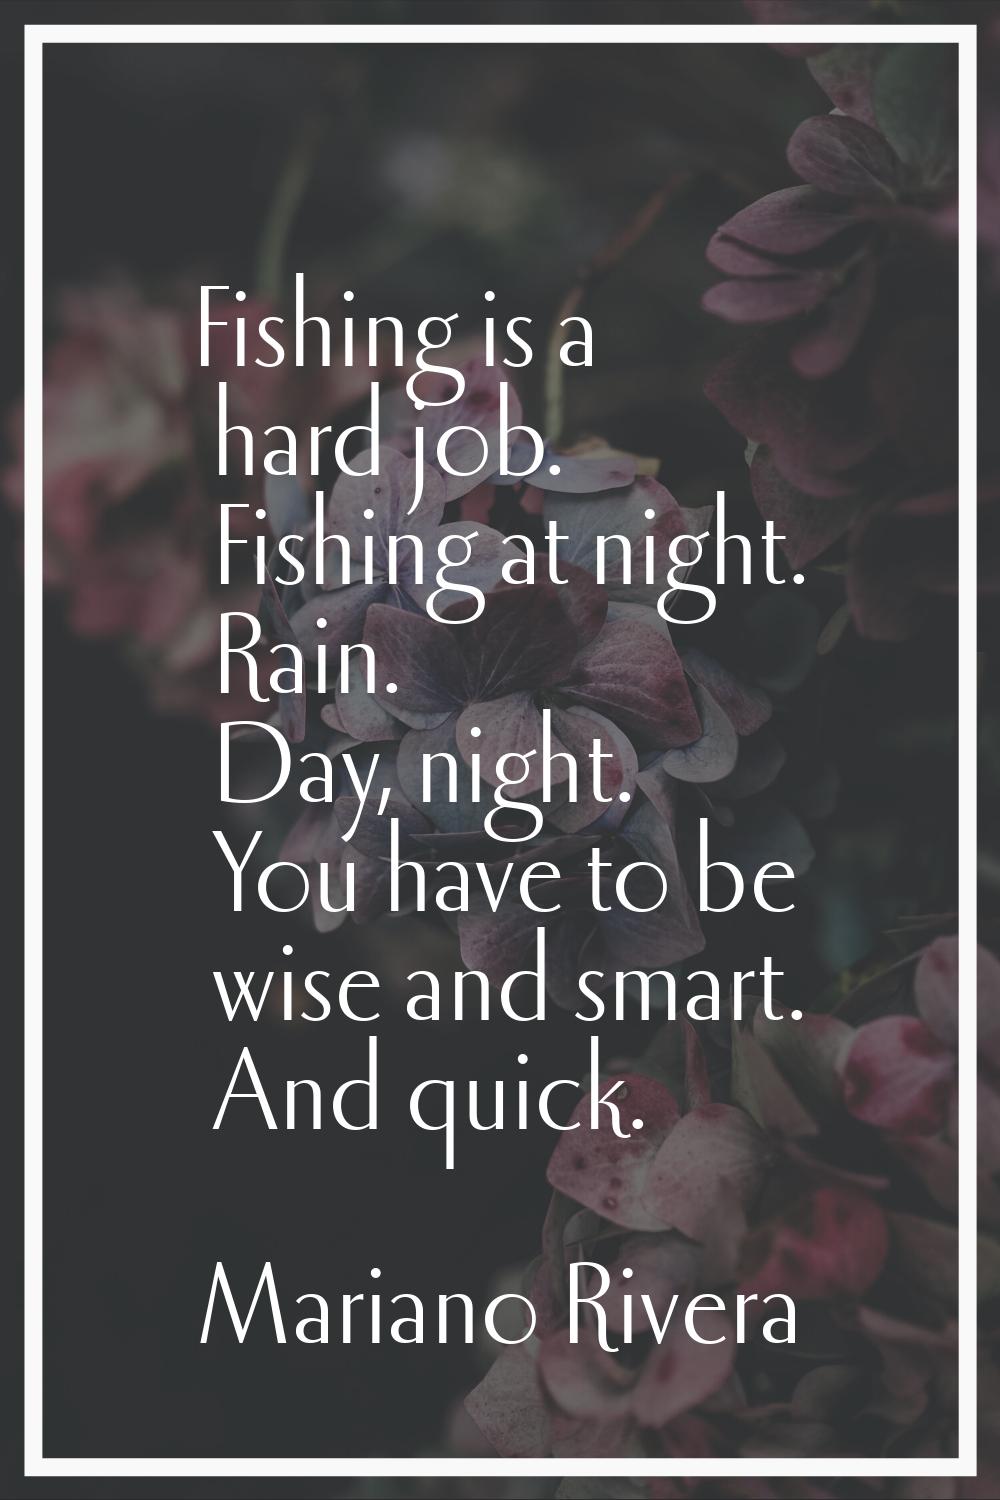 Fishing is a hard job. Fishing at night. Rain. Day, night. You have to be wise and smart. And quick